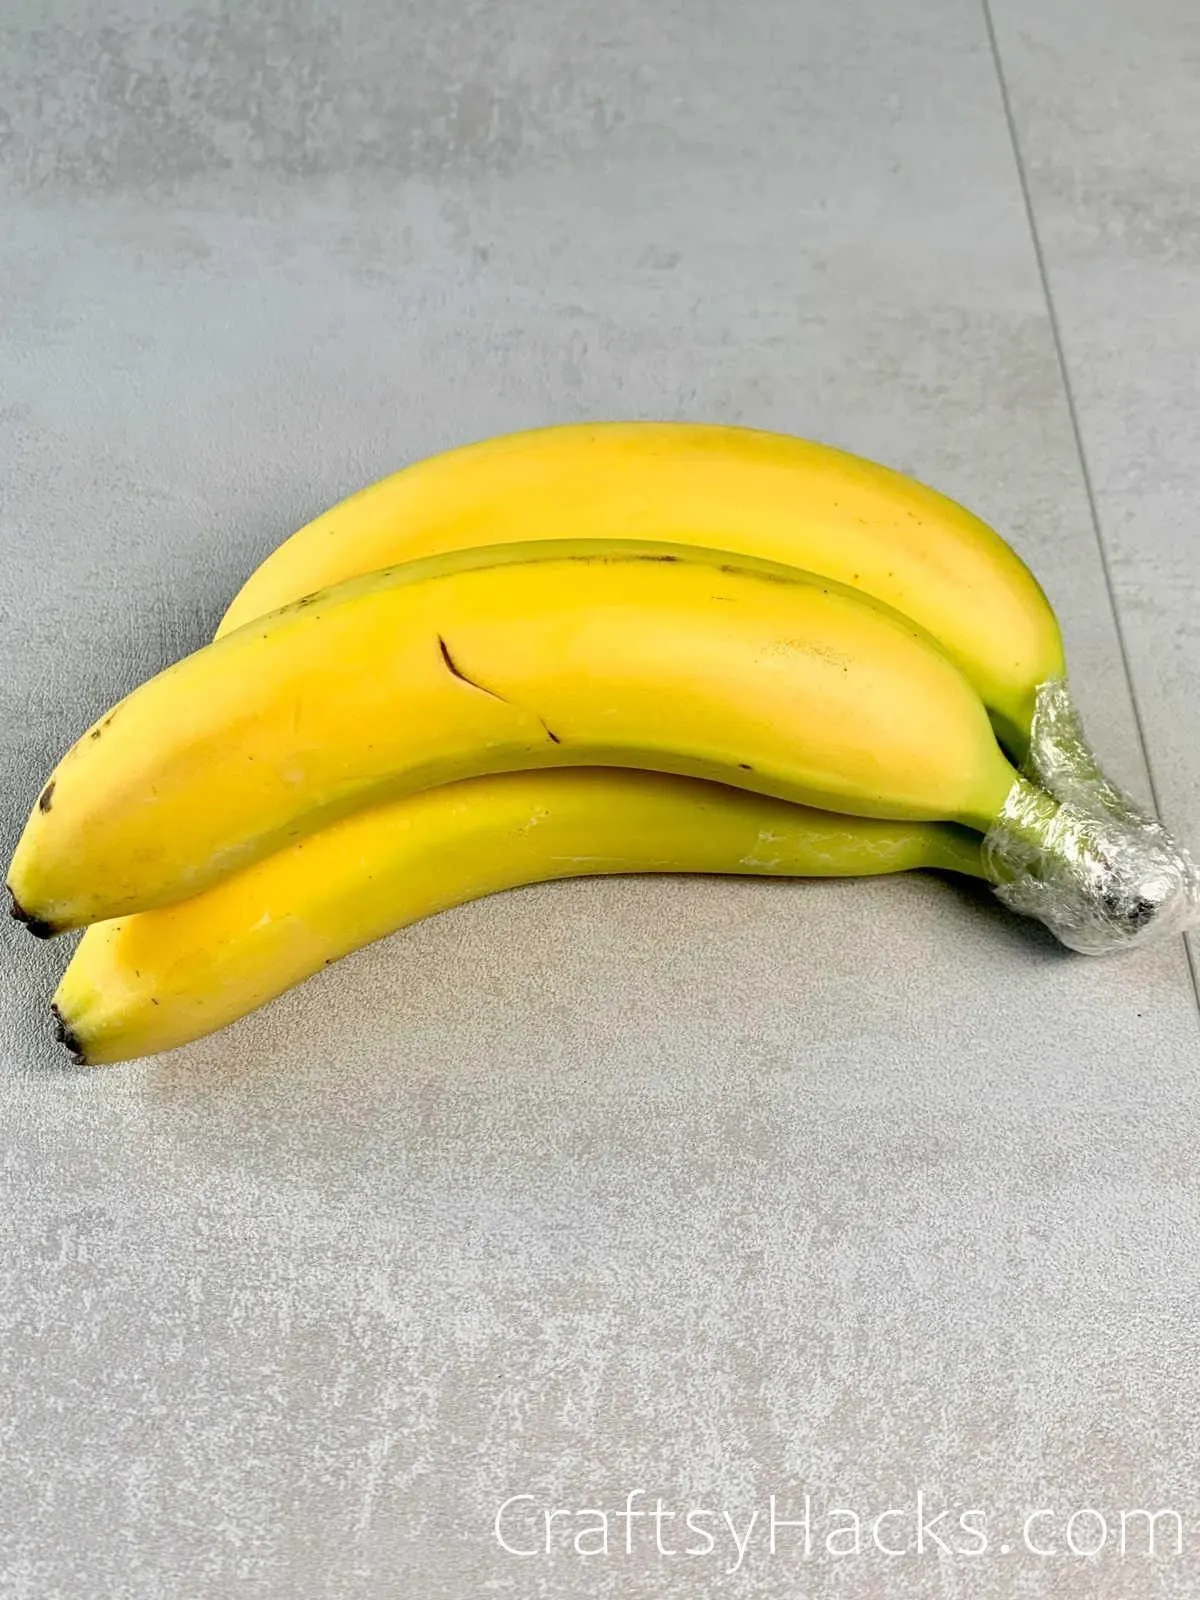 prevent bananas from ripening with saran wrap